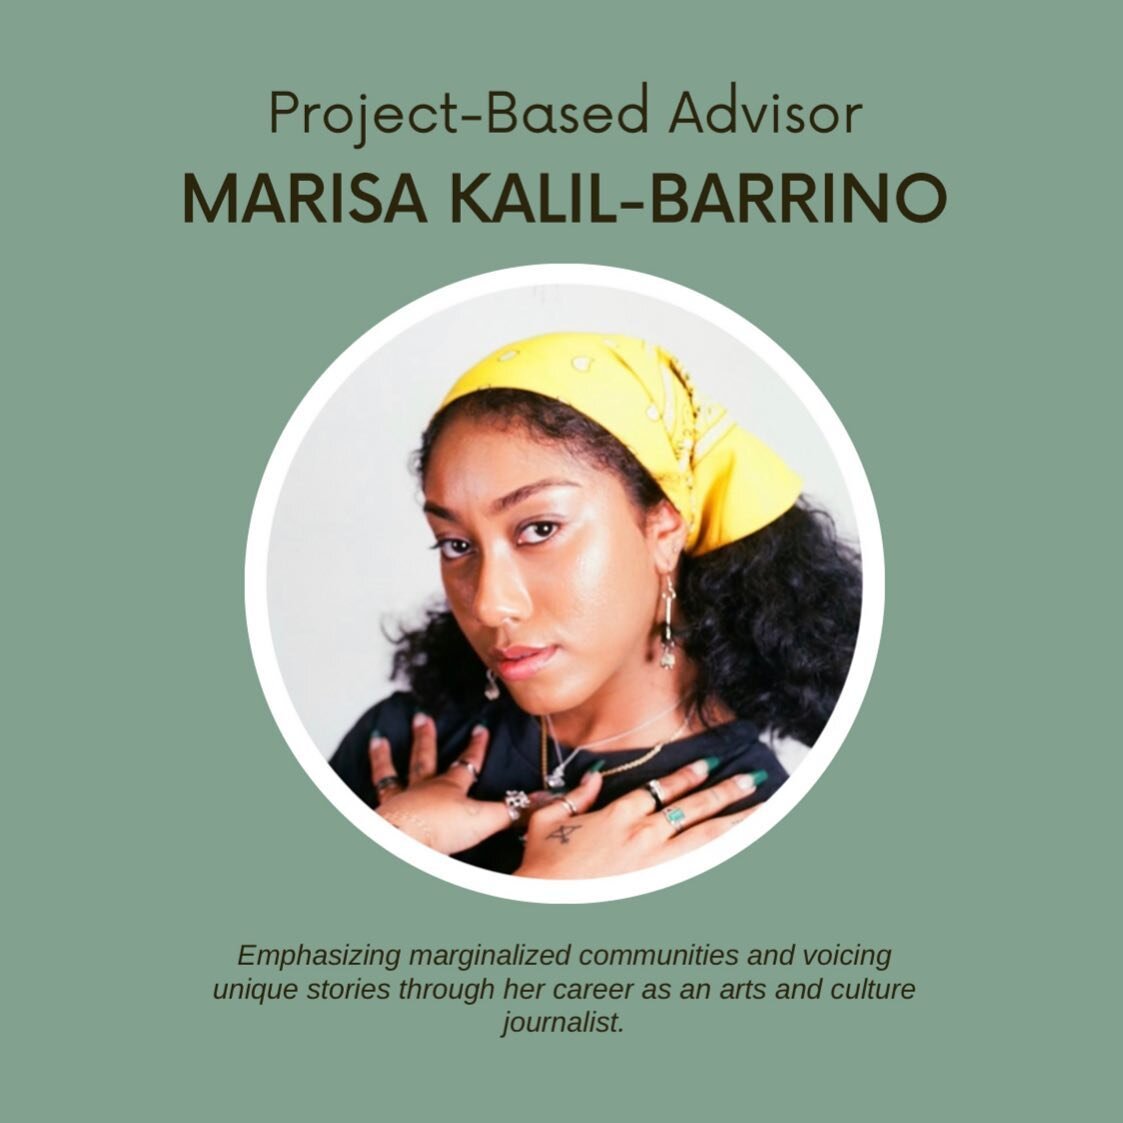 Meet Marisa! She is a Project-Based Advisor with CityShares. She plays a large role in CityShares&rsquo; social media management, narrative development, and task-based work.

Detroit native who is now based in NYC, Marisa is a journalist who speciali